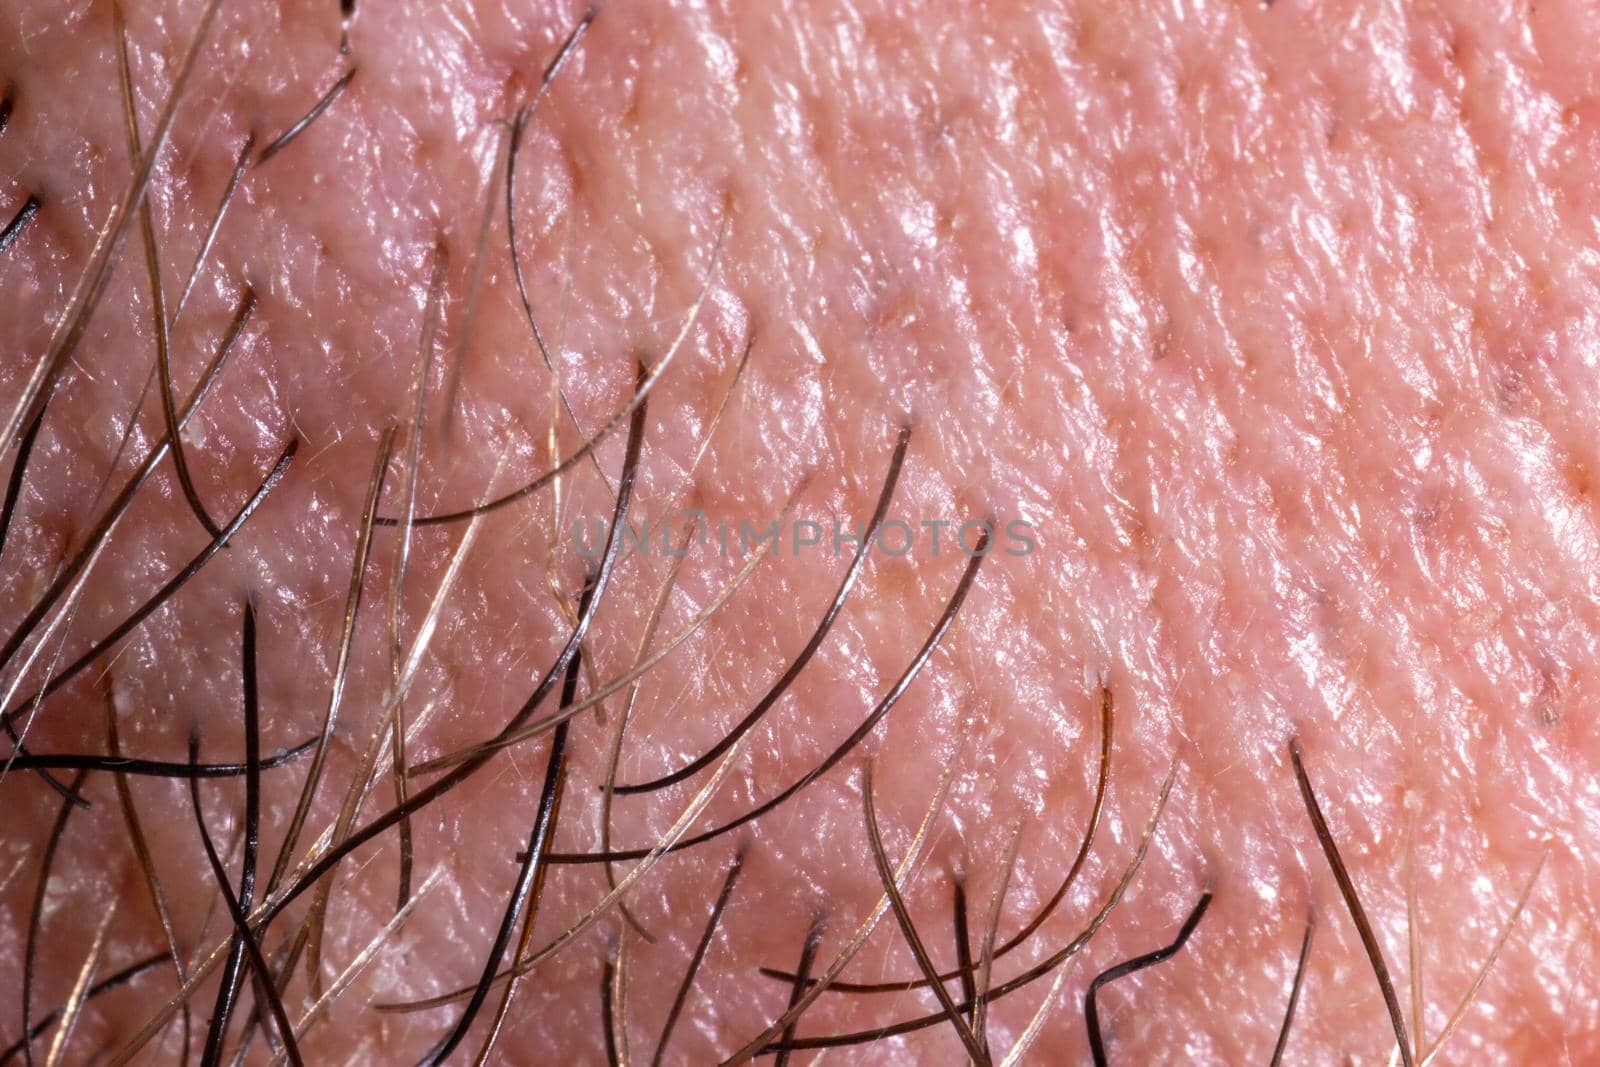 Human skin texture with pores and hair. Extreme close-up macro shot